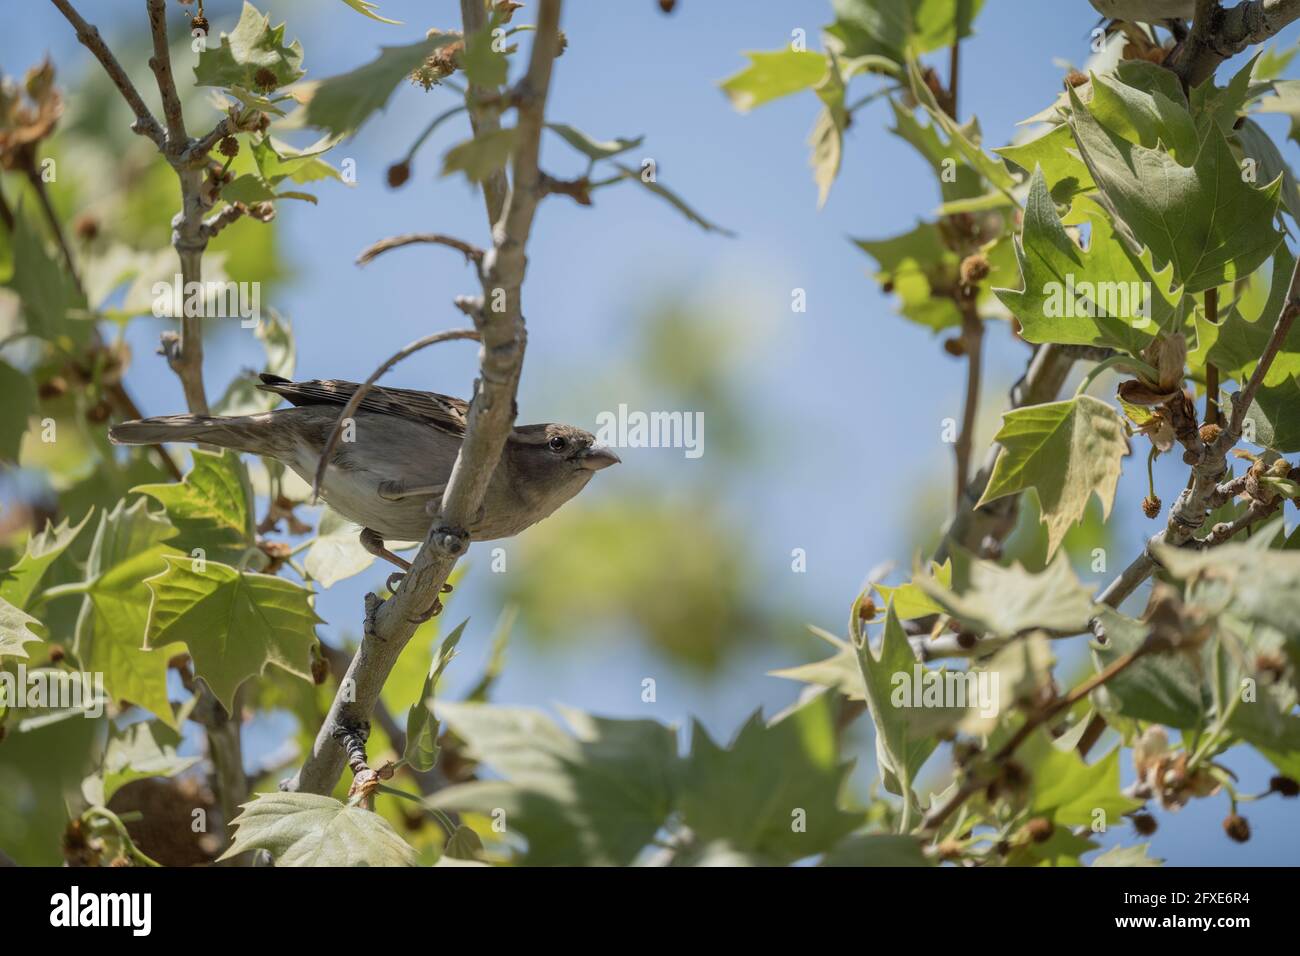 Selective focus shot of a little Hume's leaf warbler bird sitting on a tree branch Stock Photo